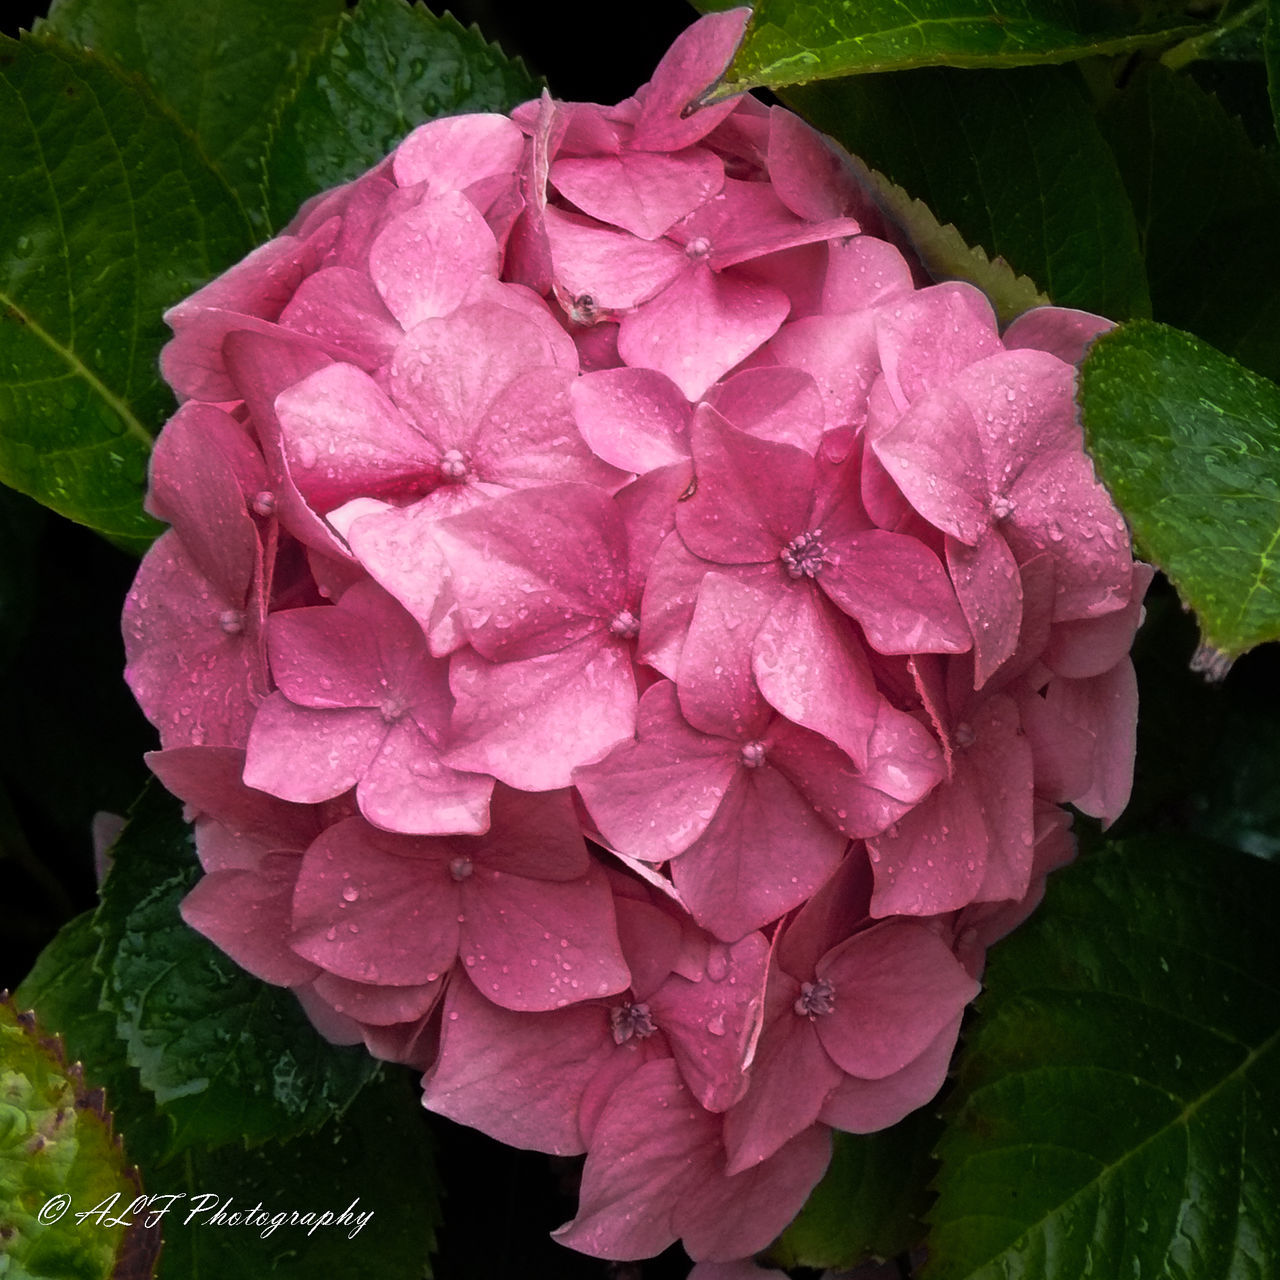 flower, plant, flowering plant, pink, leaf, plant part, beauty in nature, freshness, petal, close-up, nature, growth, inflorescence, flower head, hydrangea, fragility, no people, drop, water, wet, outdoors, magenta, springtime, hydrangea serrata, day, botany